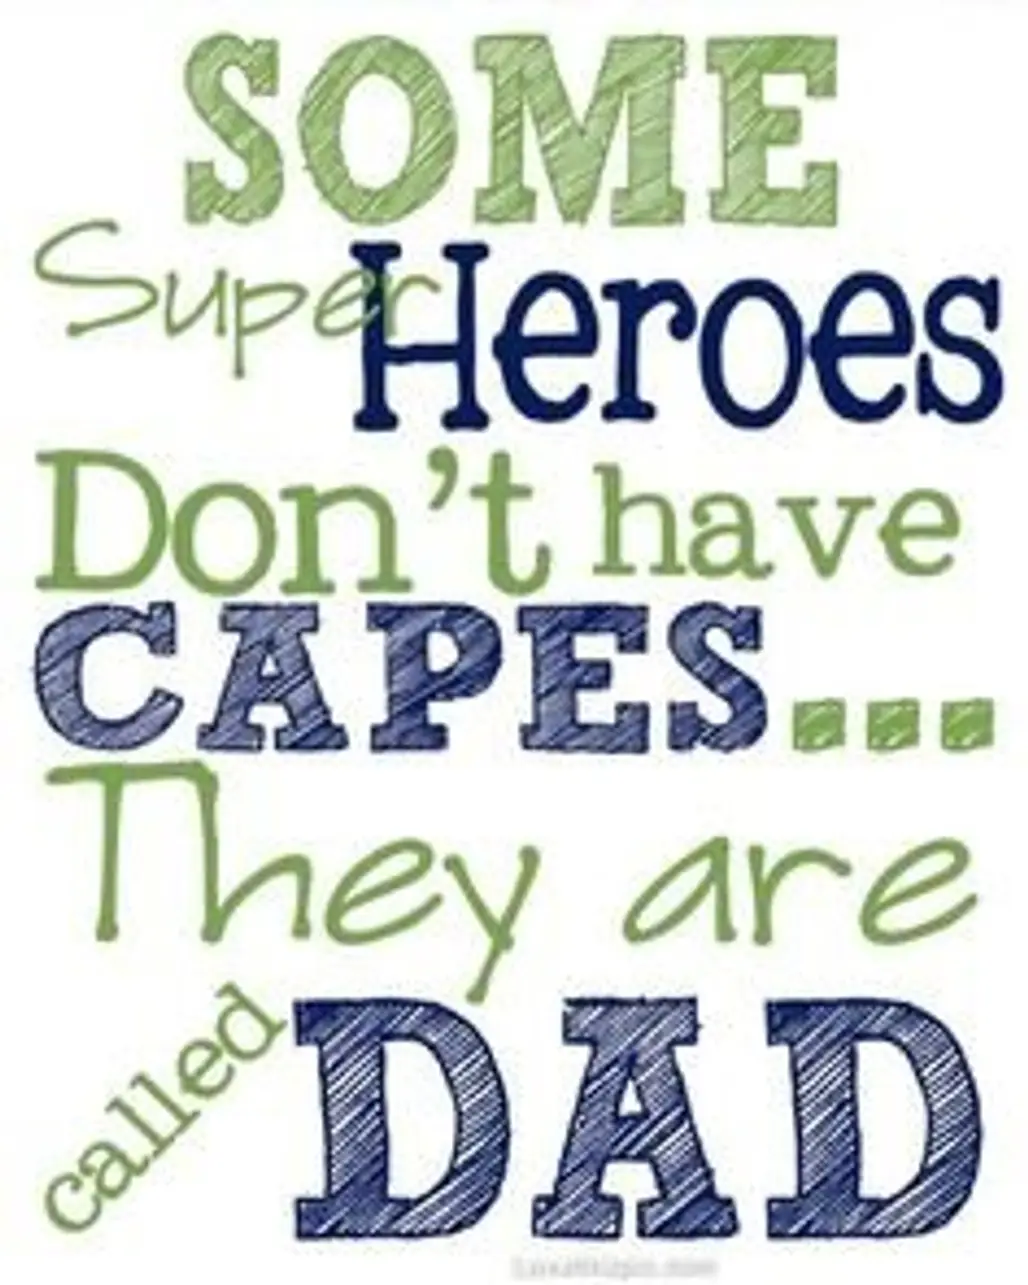 Dads Are Heroes!